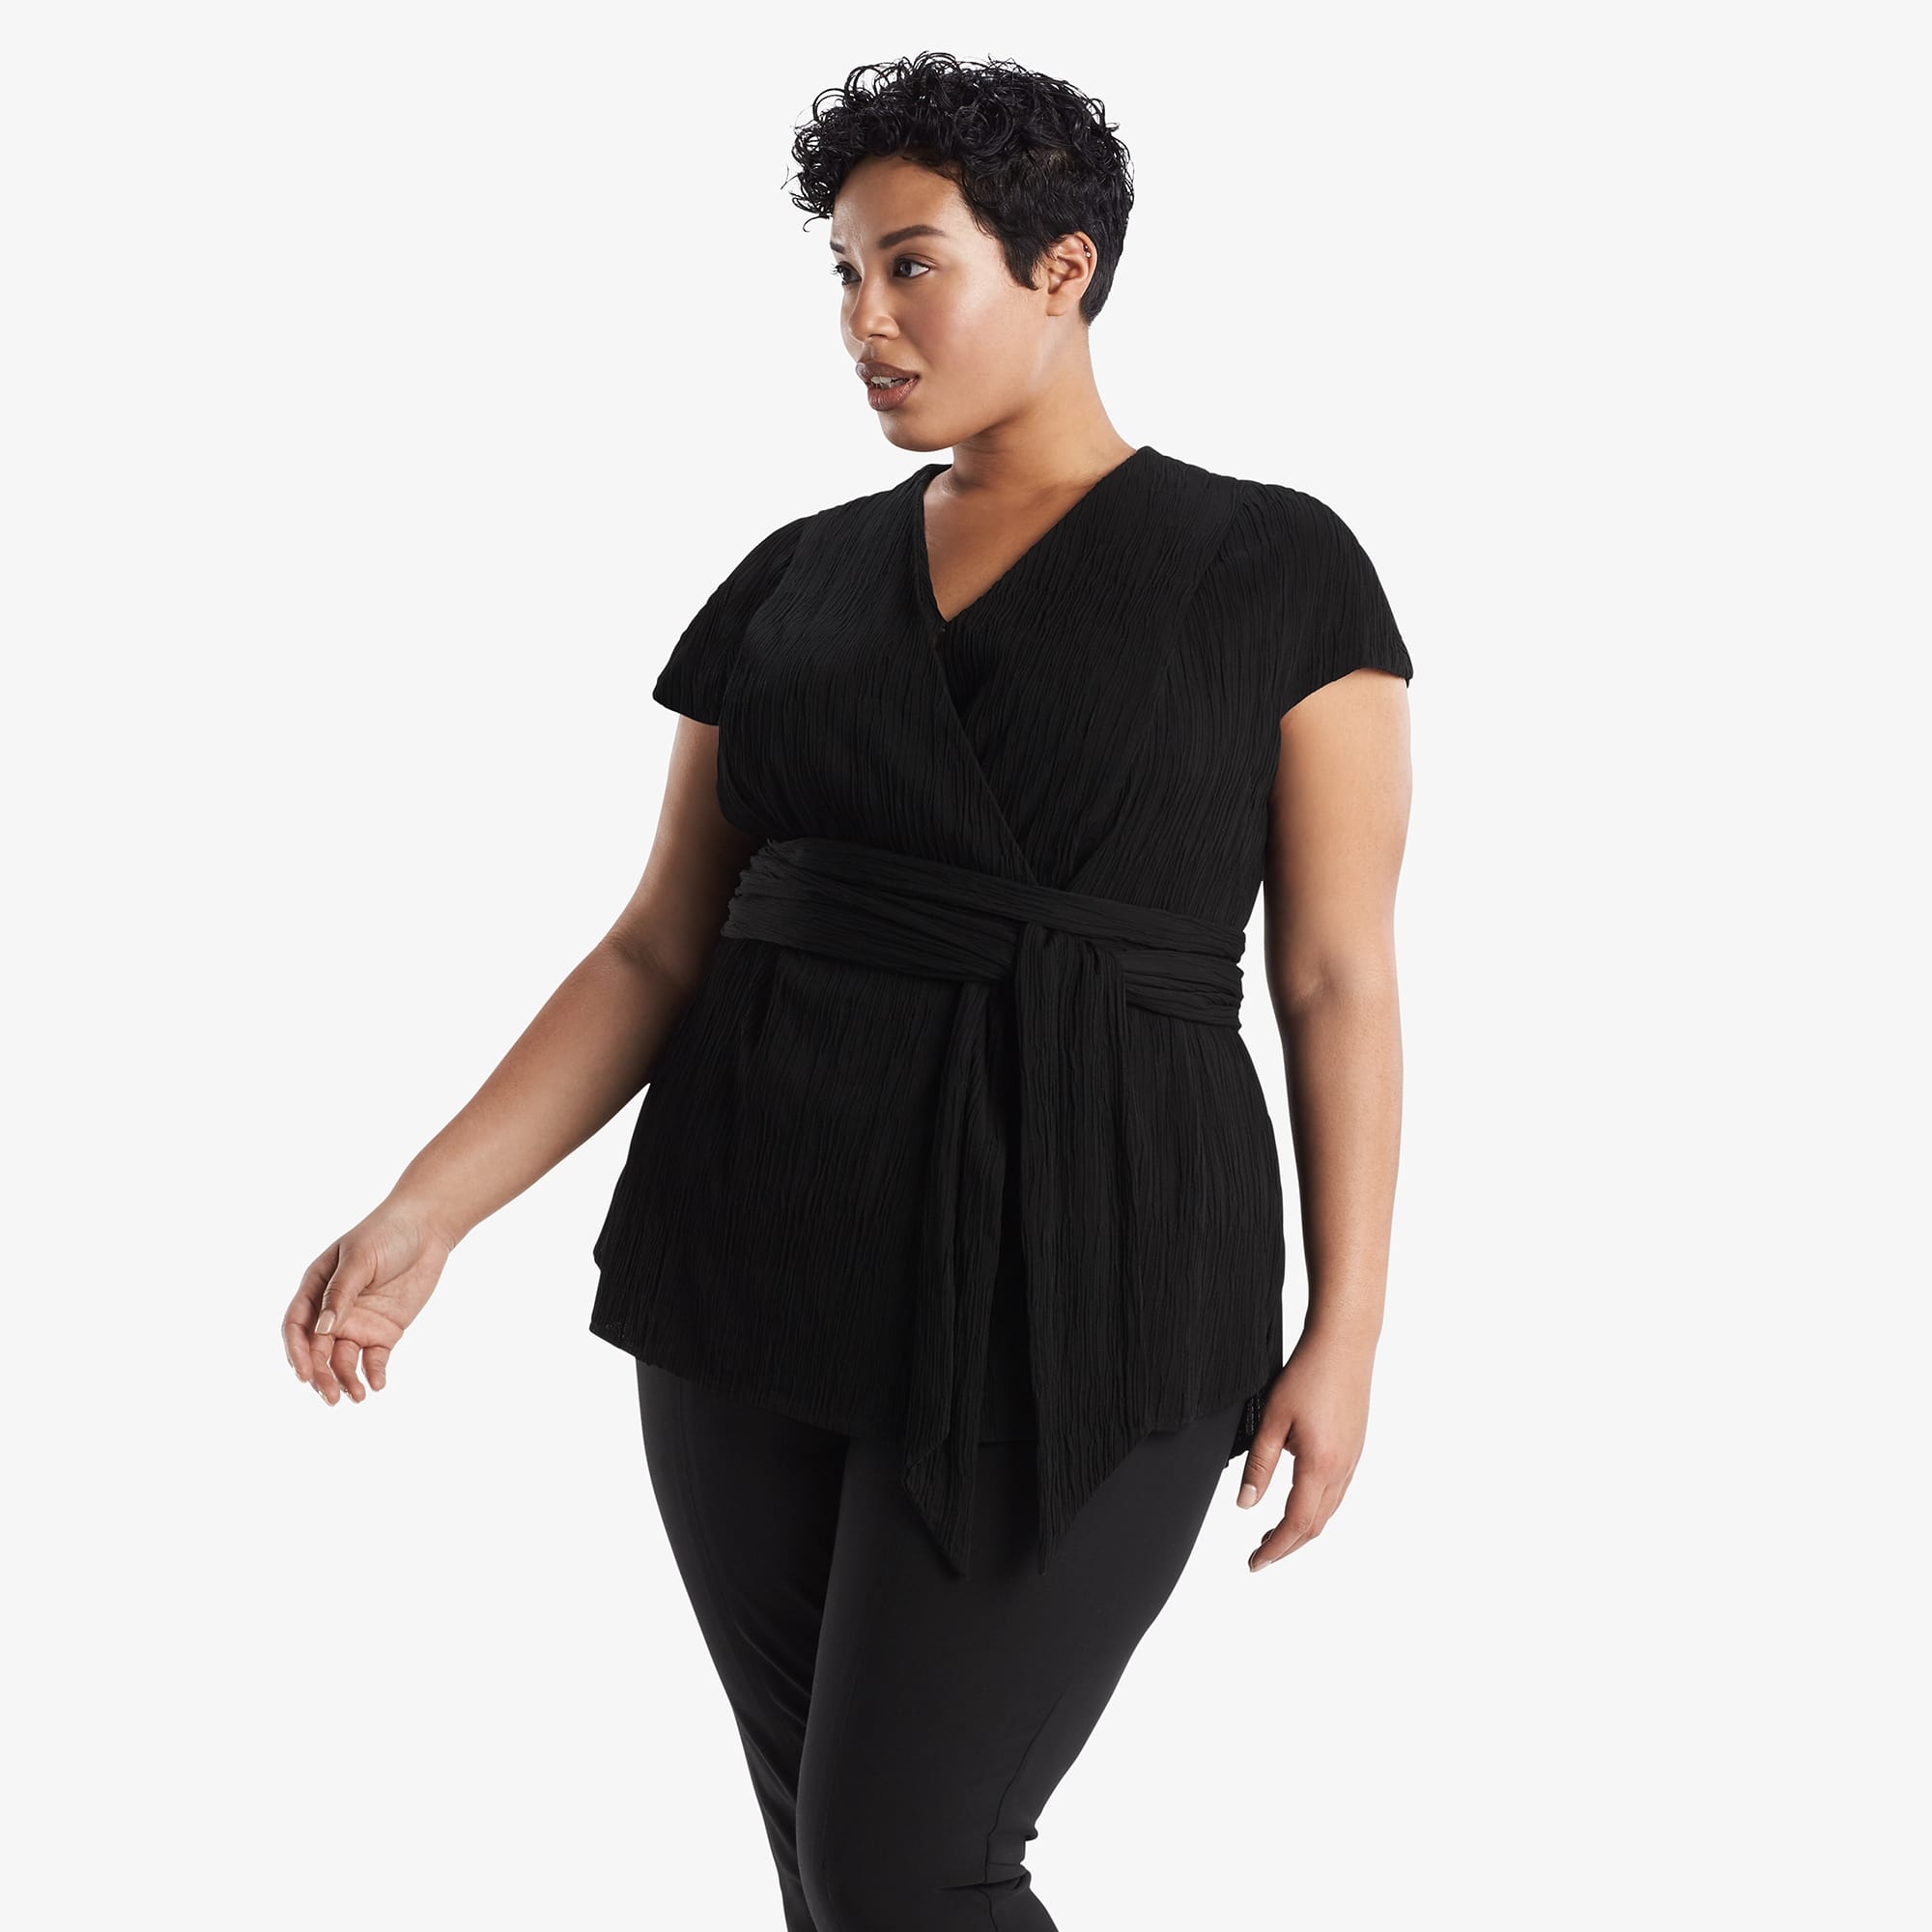 Side image of a woman standing wearing the Valerie Top in black